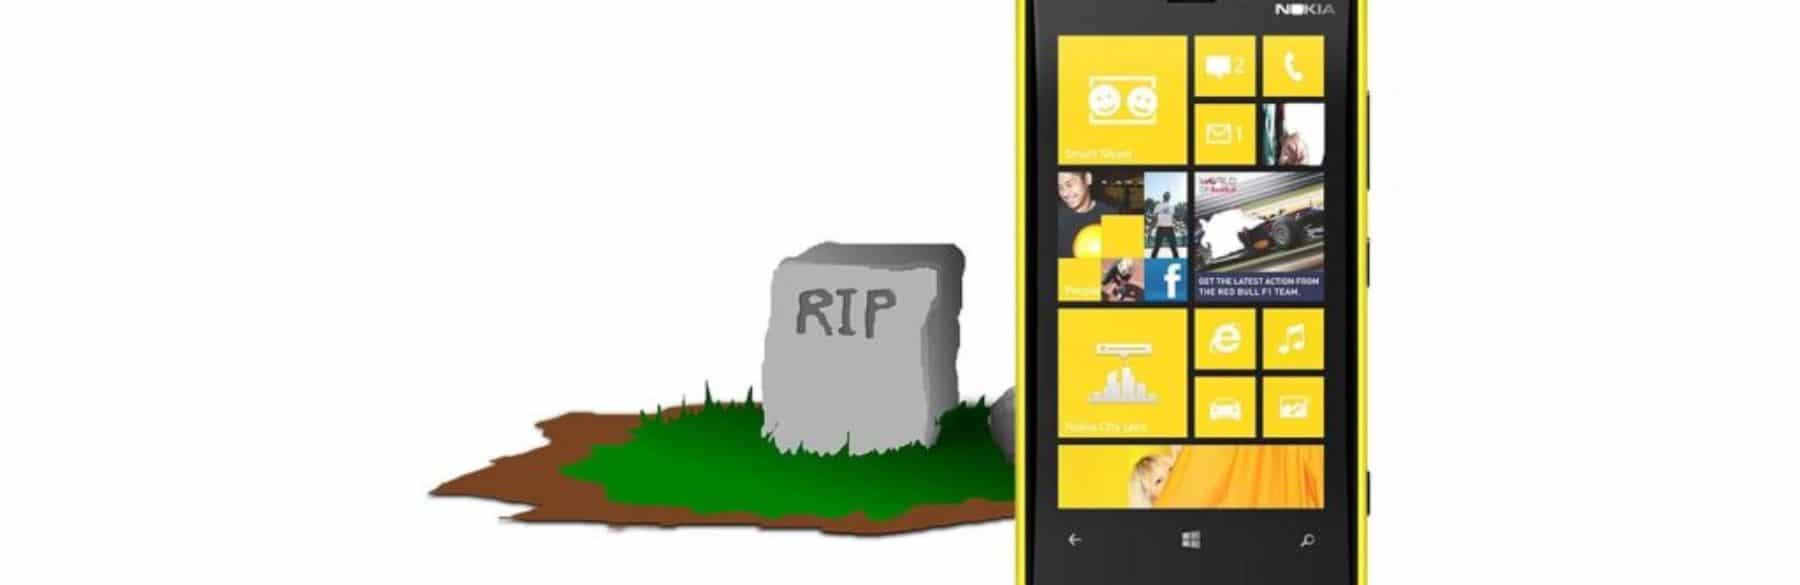 Windows Phones are Officially Dead – Microsoft Official